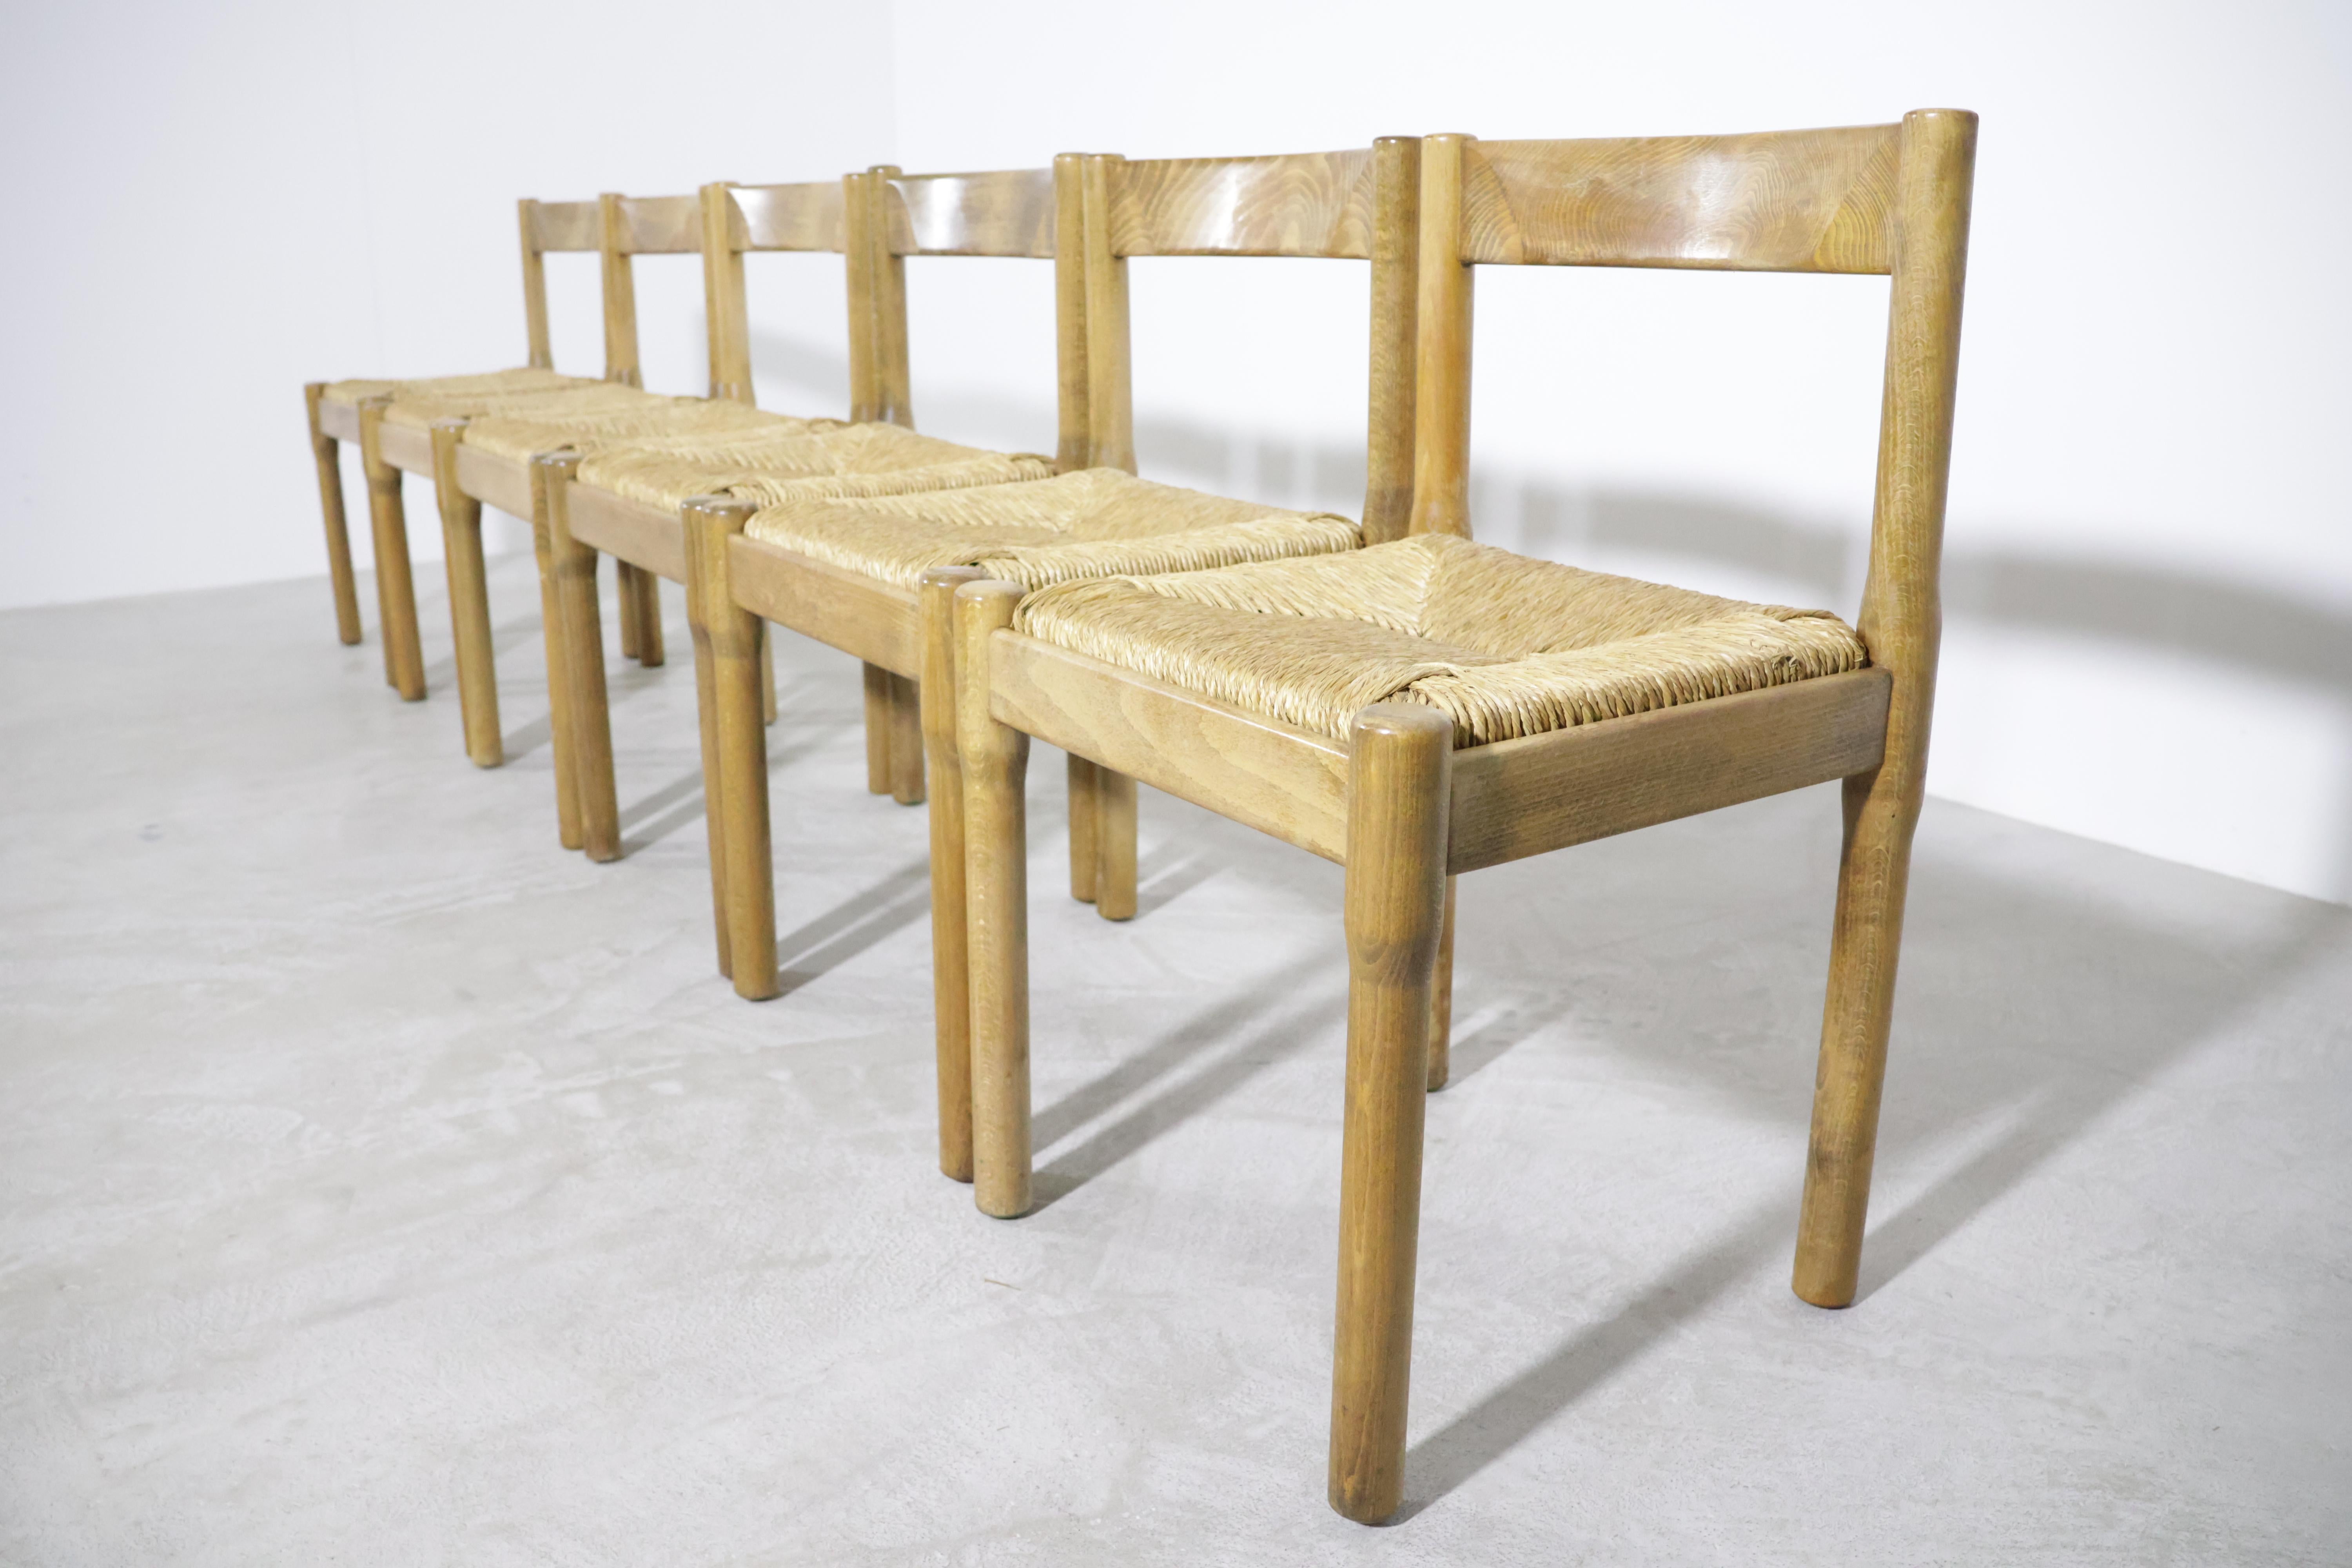 A beautiful set of six 'Carimate' dining chairs by Vico Magistretti for Mario Luigi Comi/Italy in the 60s!
The 'Carimate' chair is one of Vico Magistretti's most famous chair and for him, rather unsual, as his furniture is better known for the